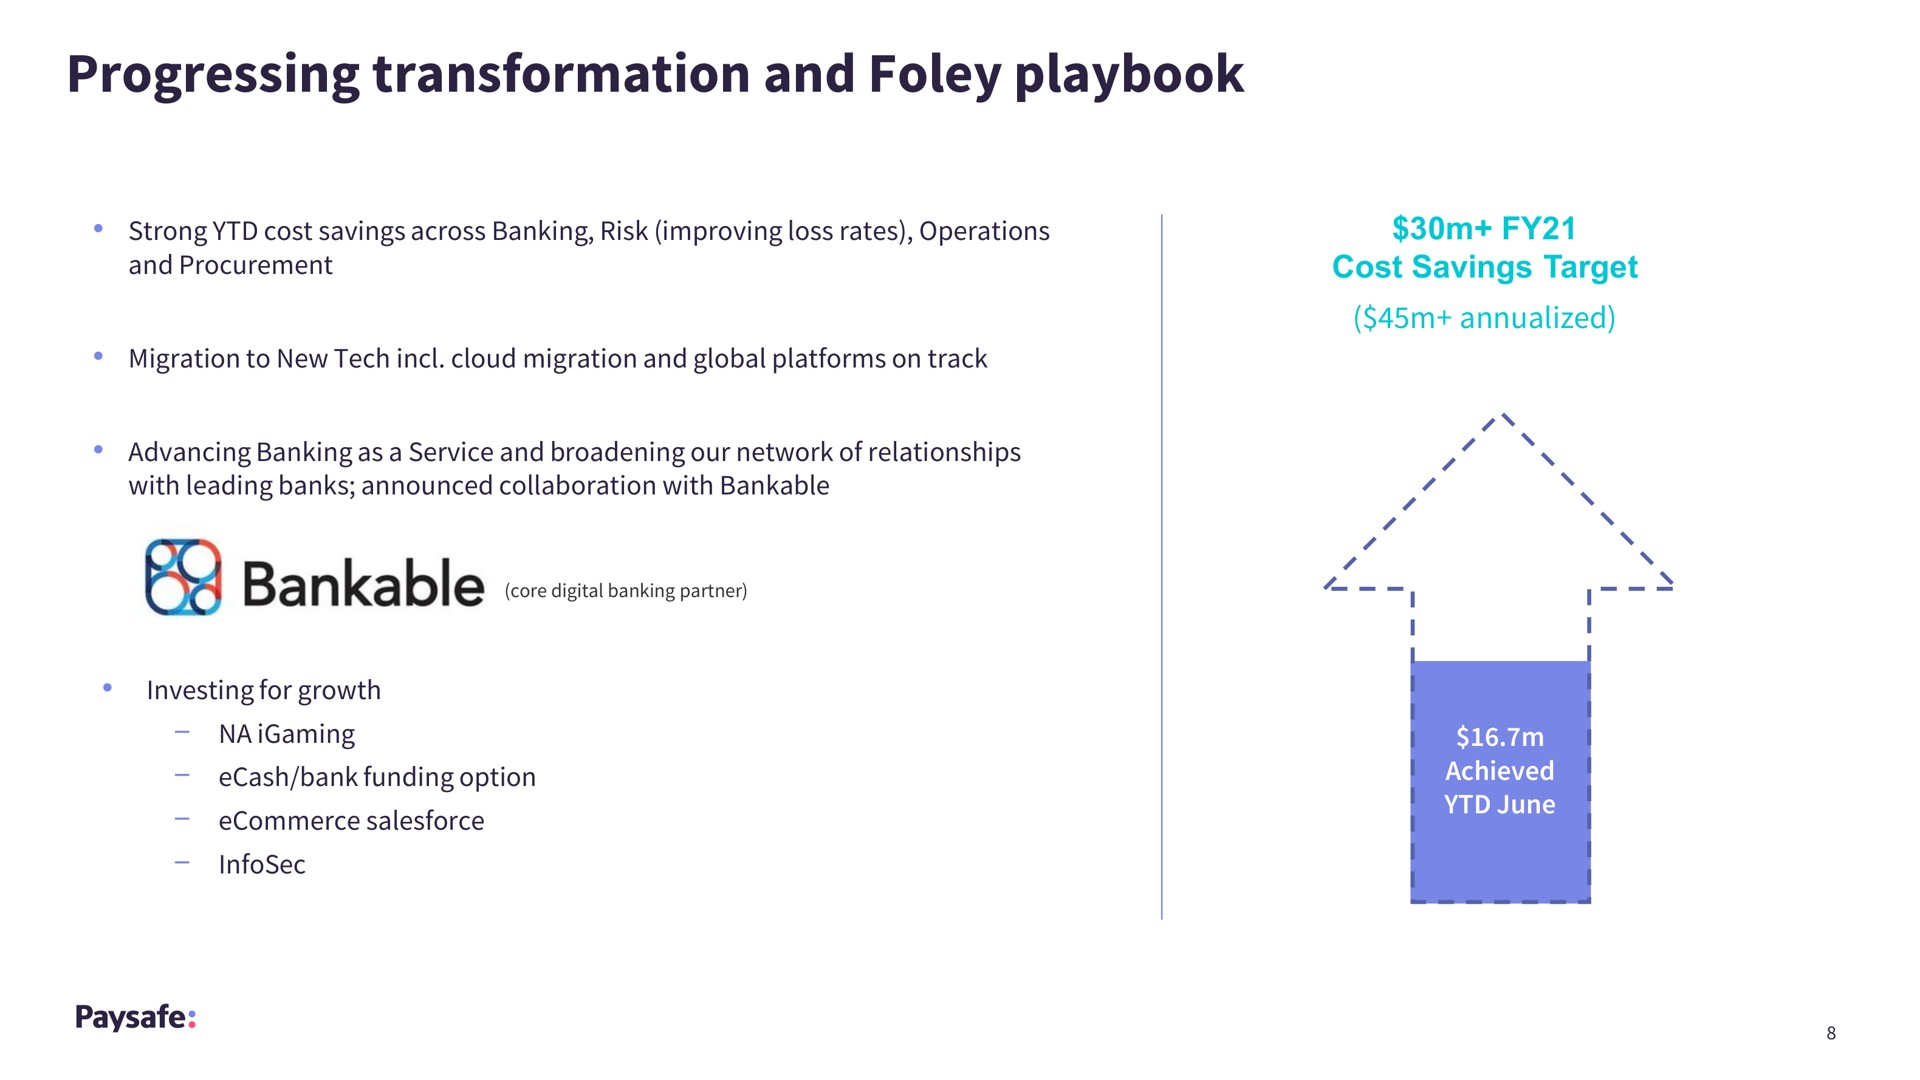 progressing transformation and playbook | Paysafe